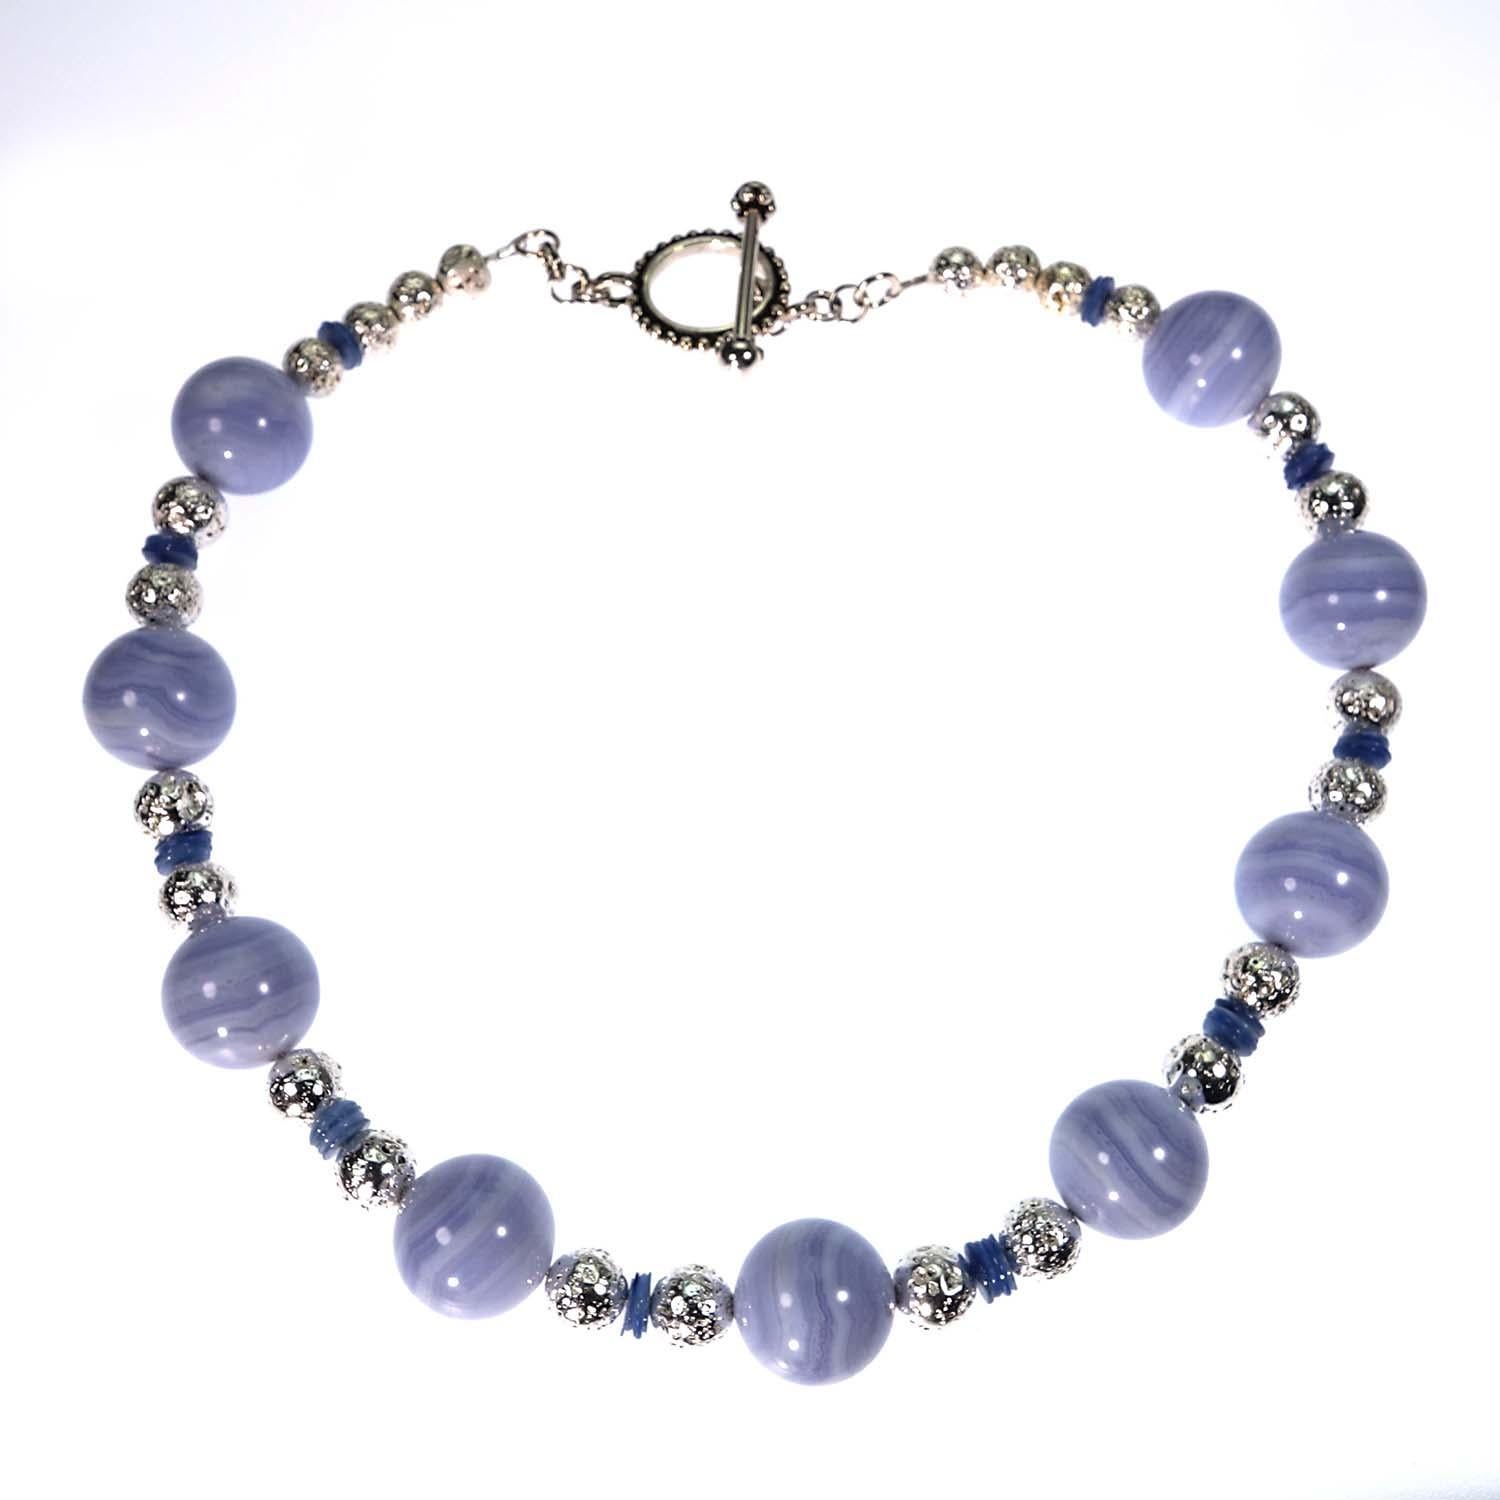 Stunning Blue Lace Agate Necklace 6